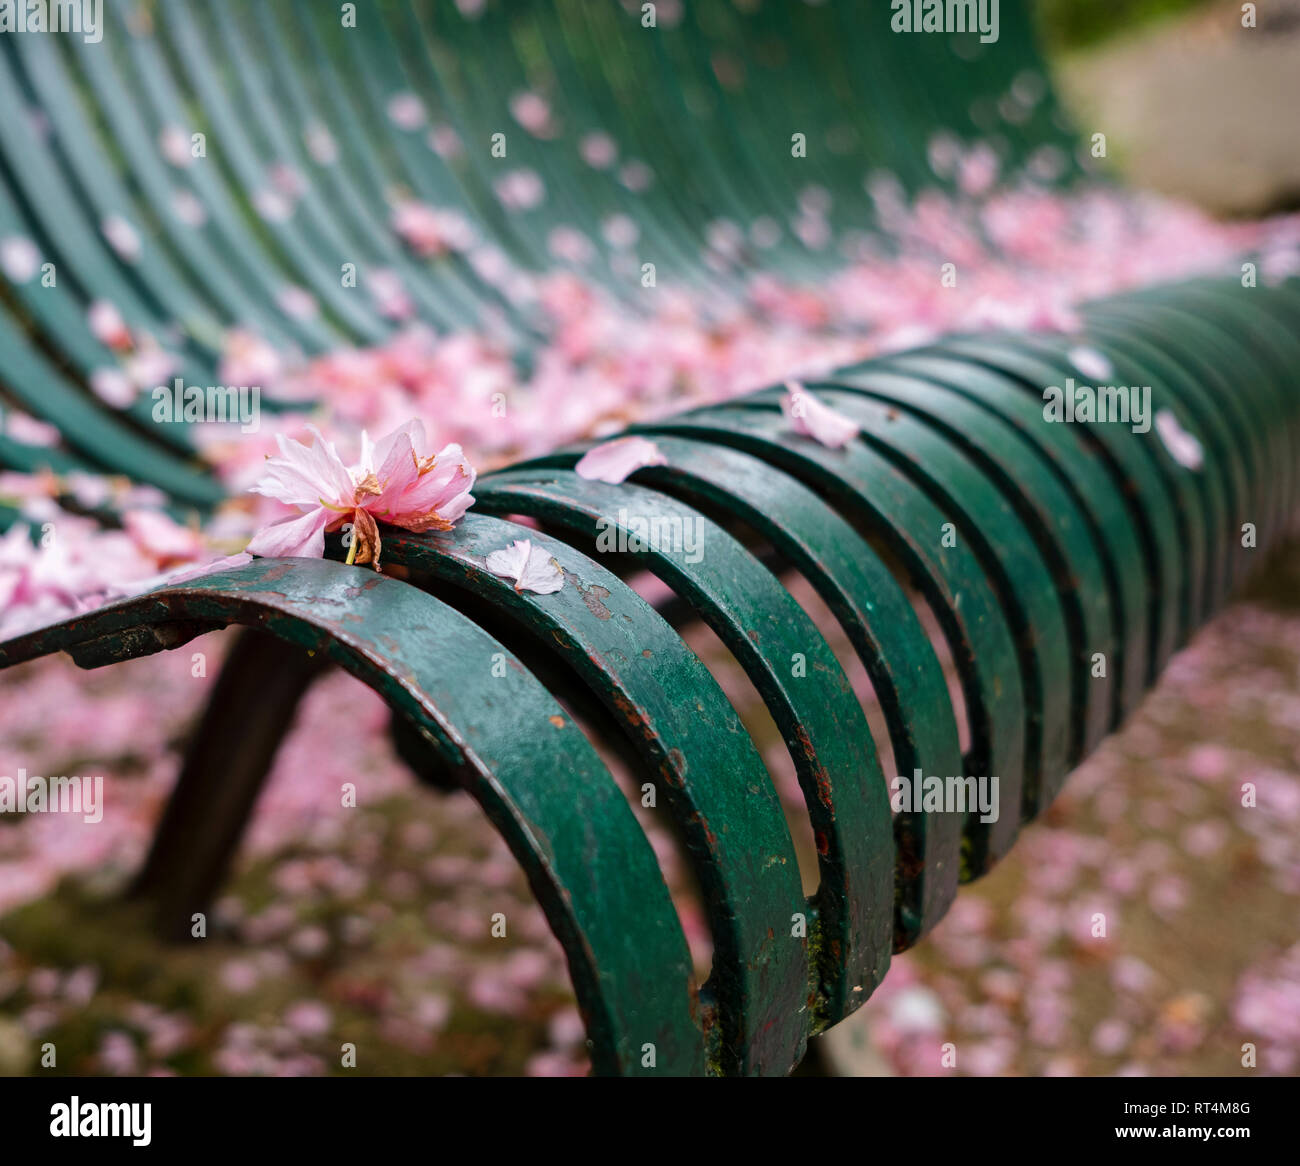 Green park bench covered with cherry blossoms and petals. Selective focus. Stock Photo